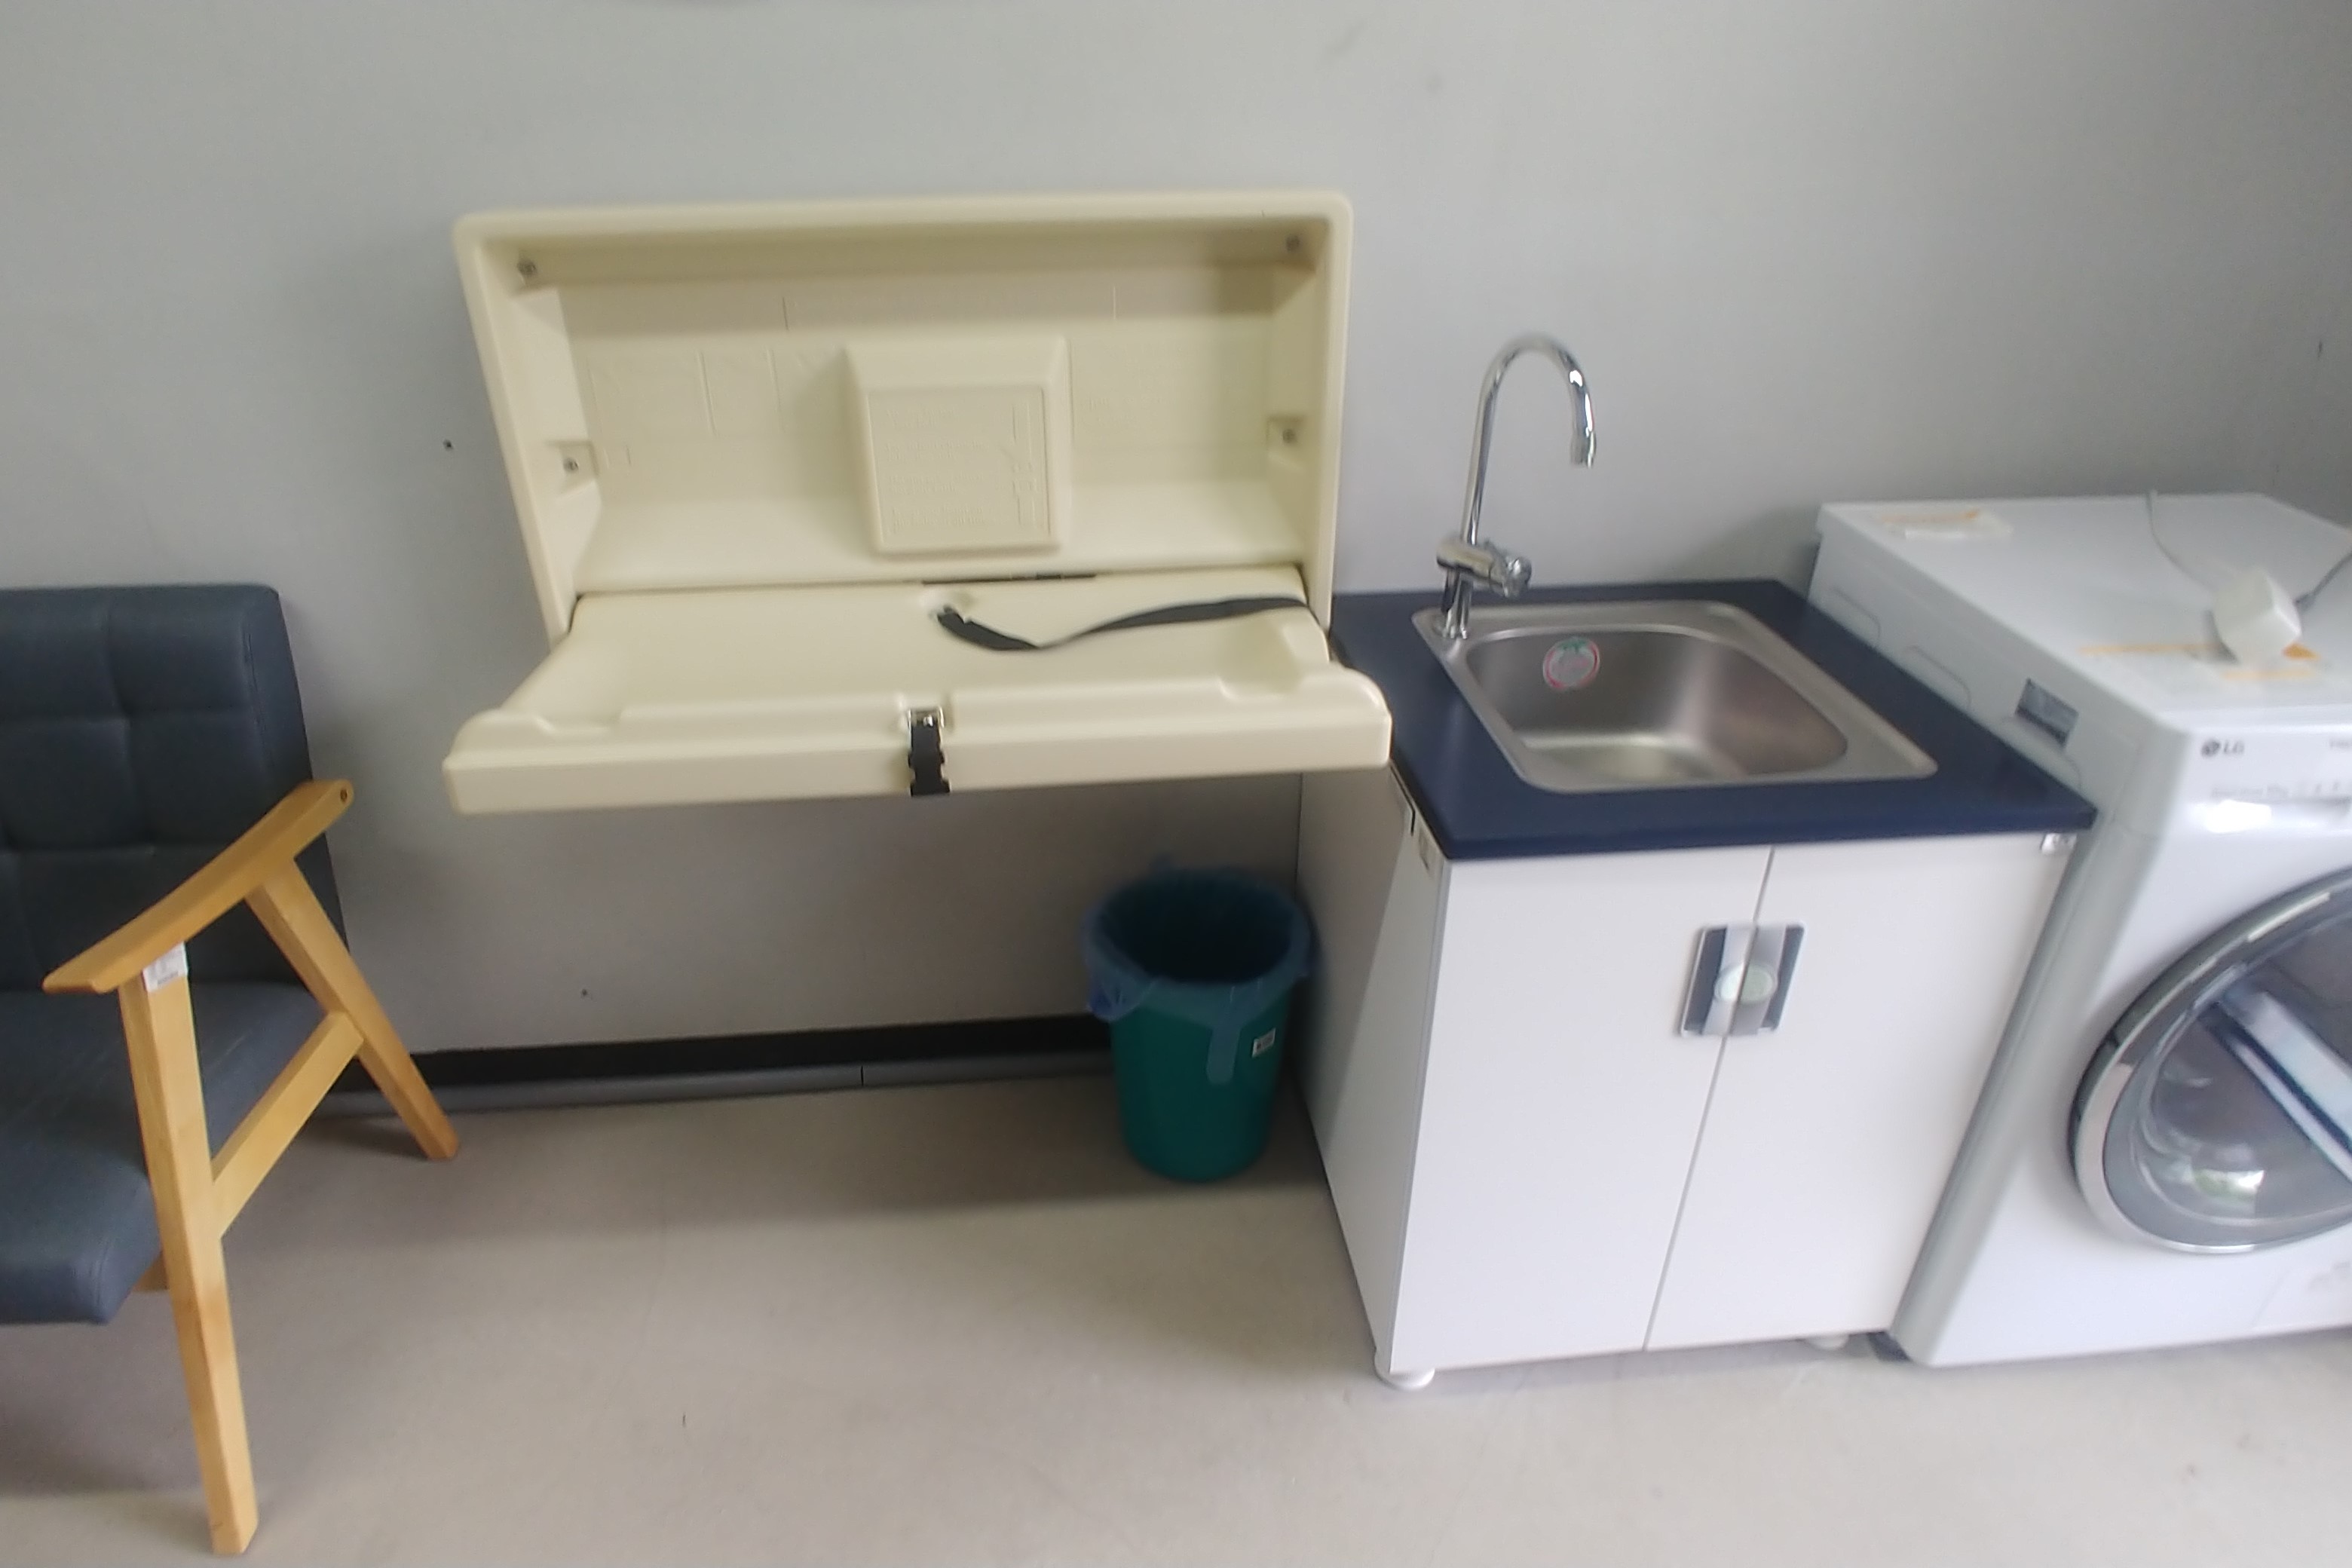 Facilities for expecting mothers and children0 : Diaper changing stations installed inside the nursing rooms with sink and washing machine